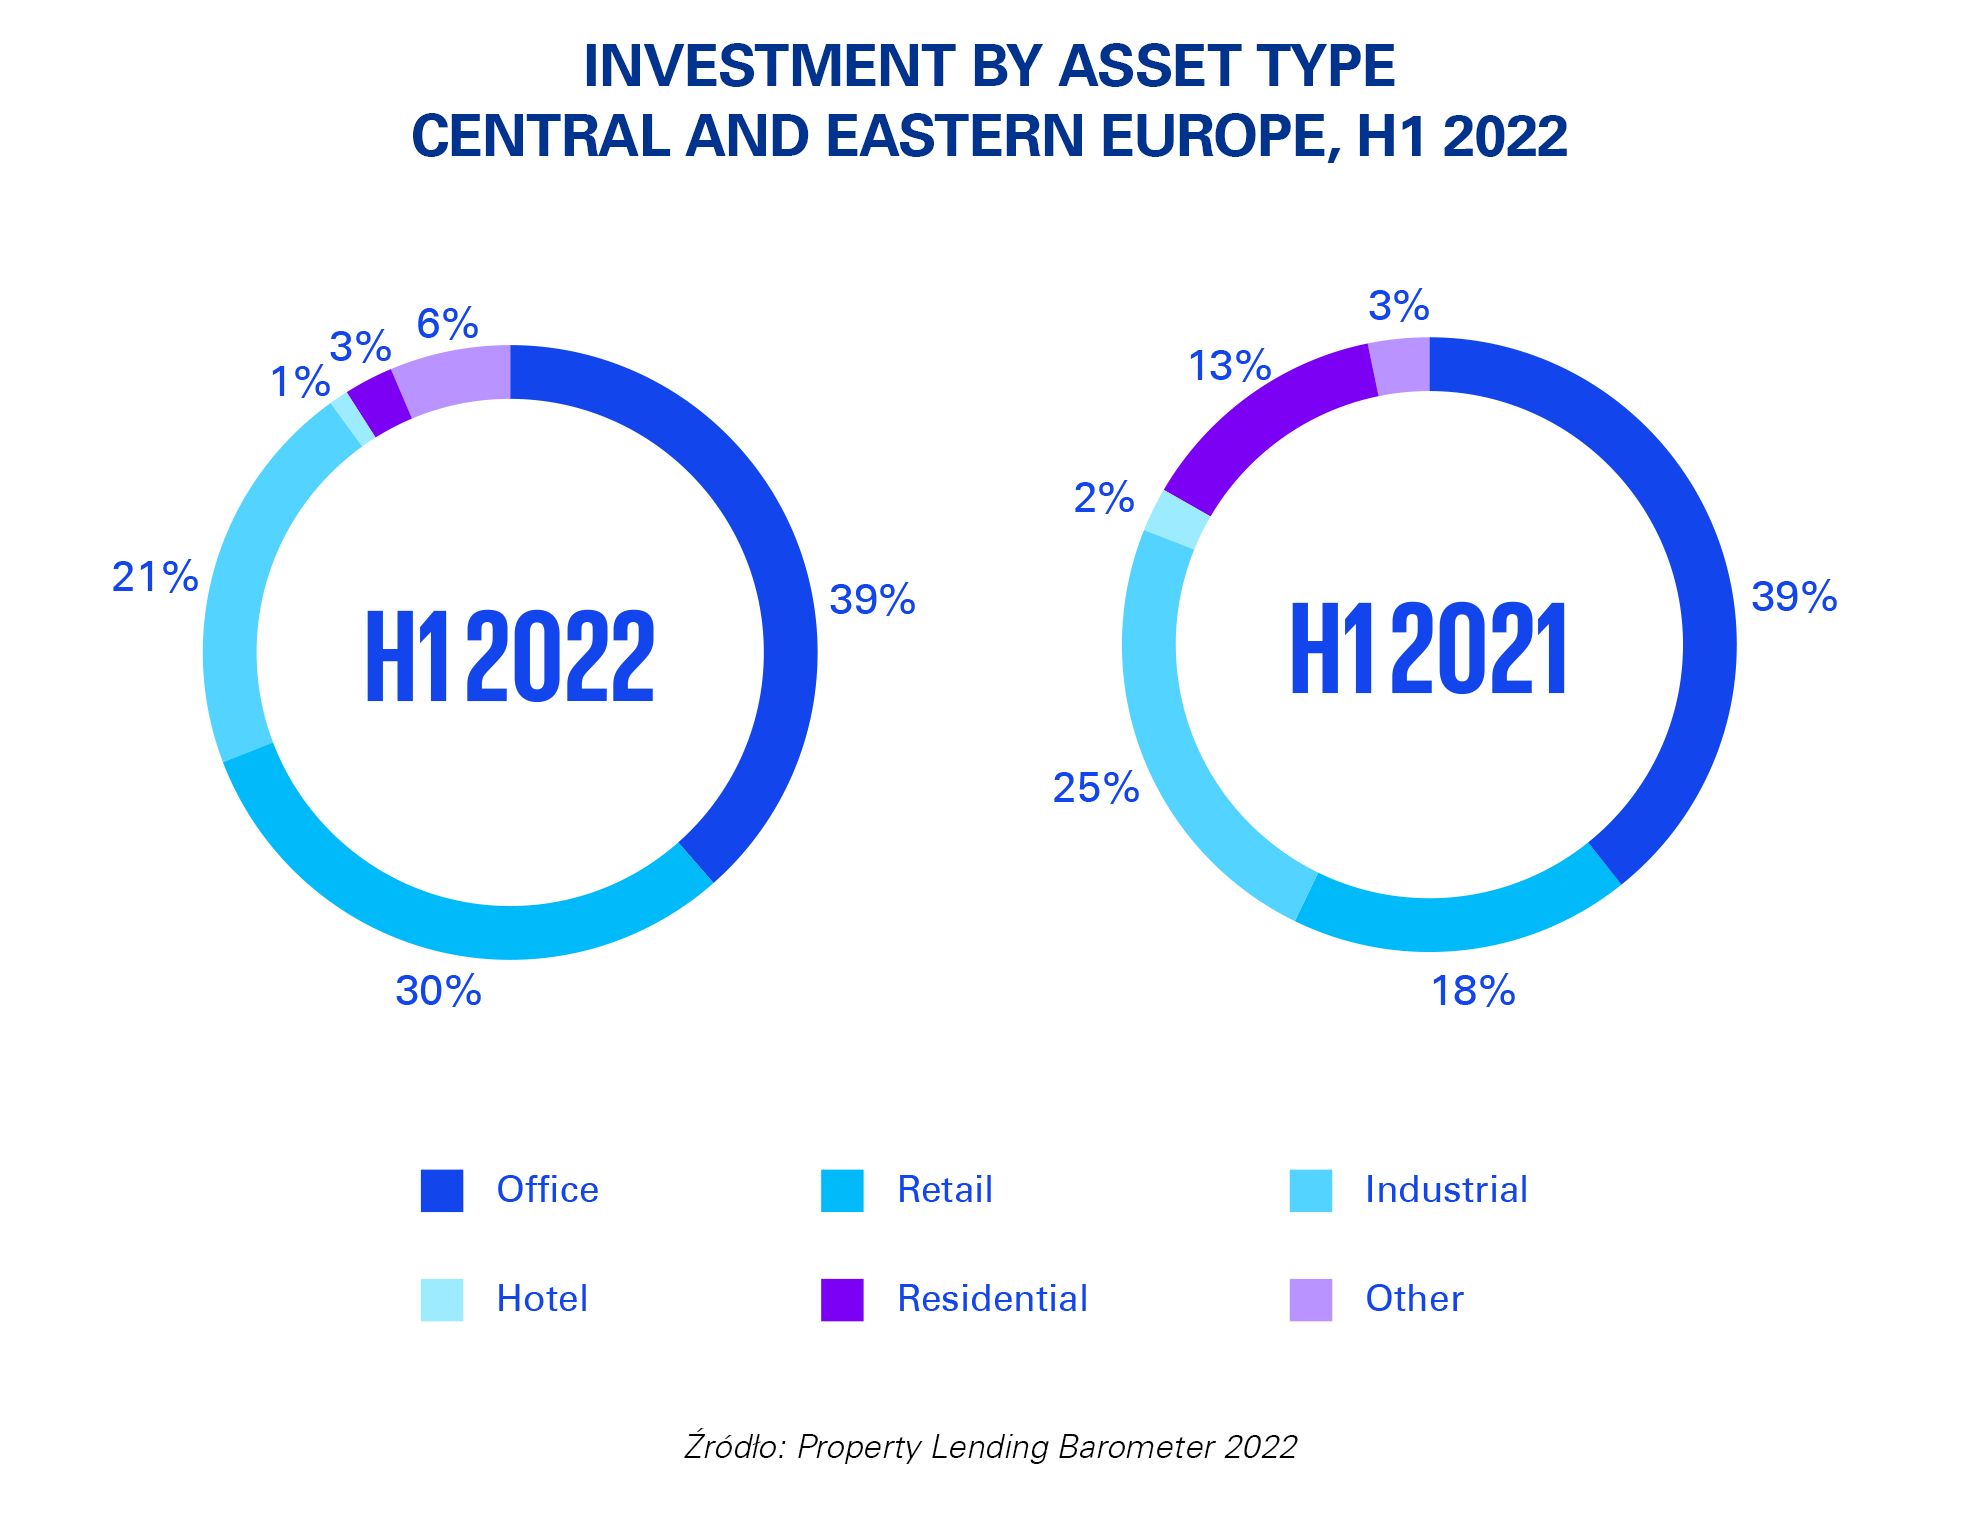 Investment by asset type central and eastern europe, H1 2022